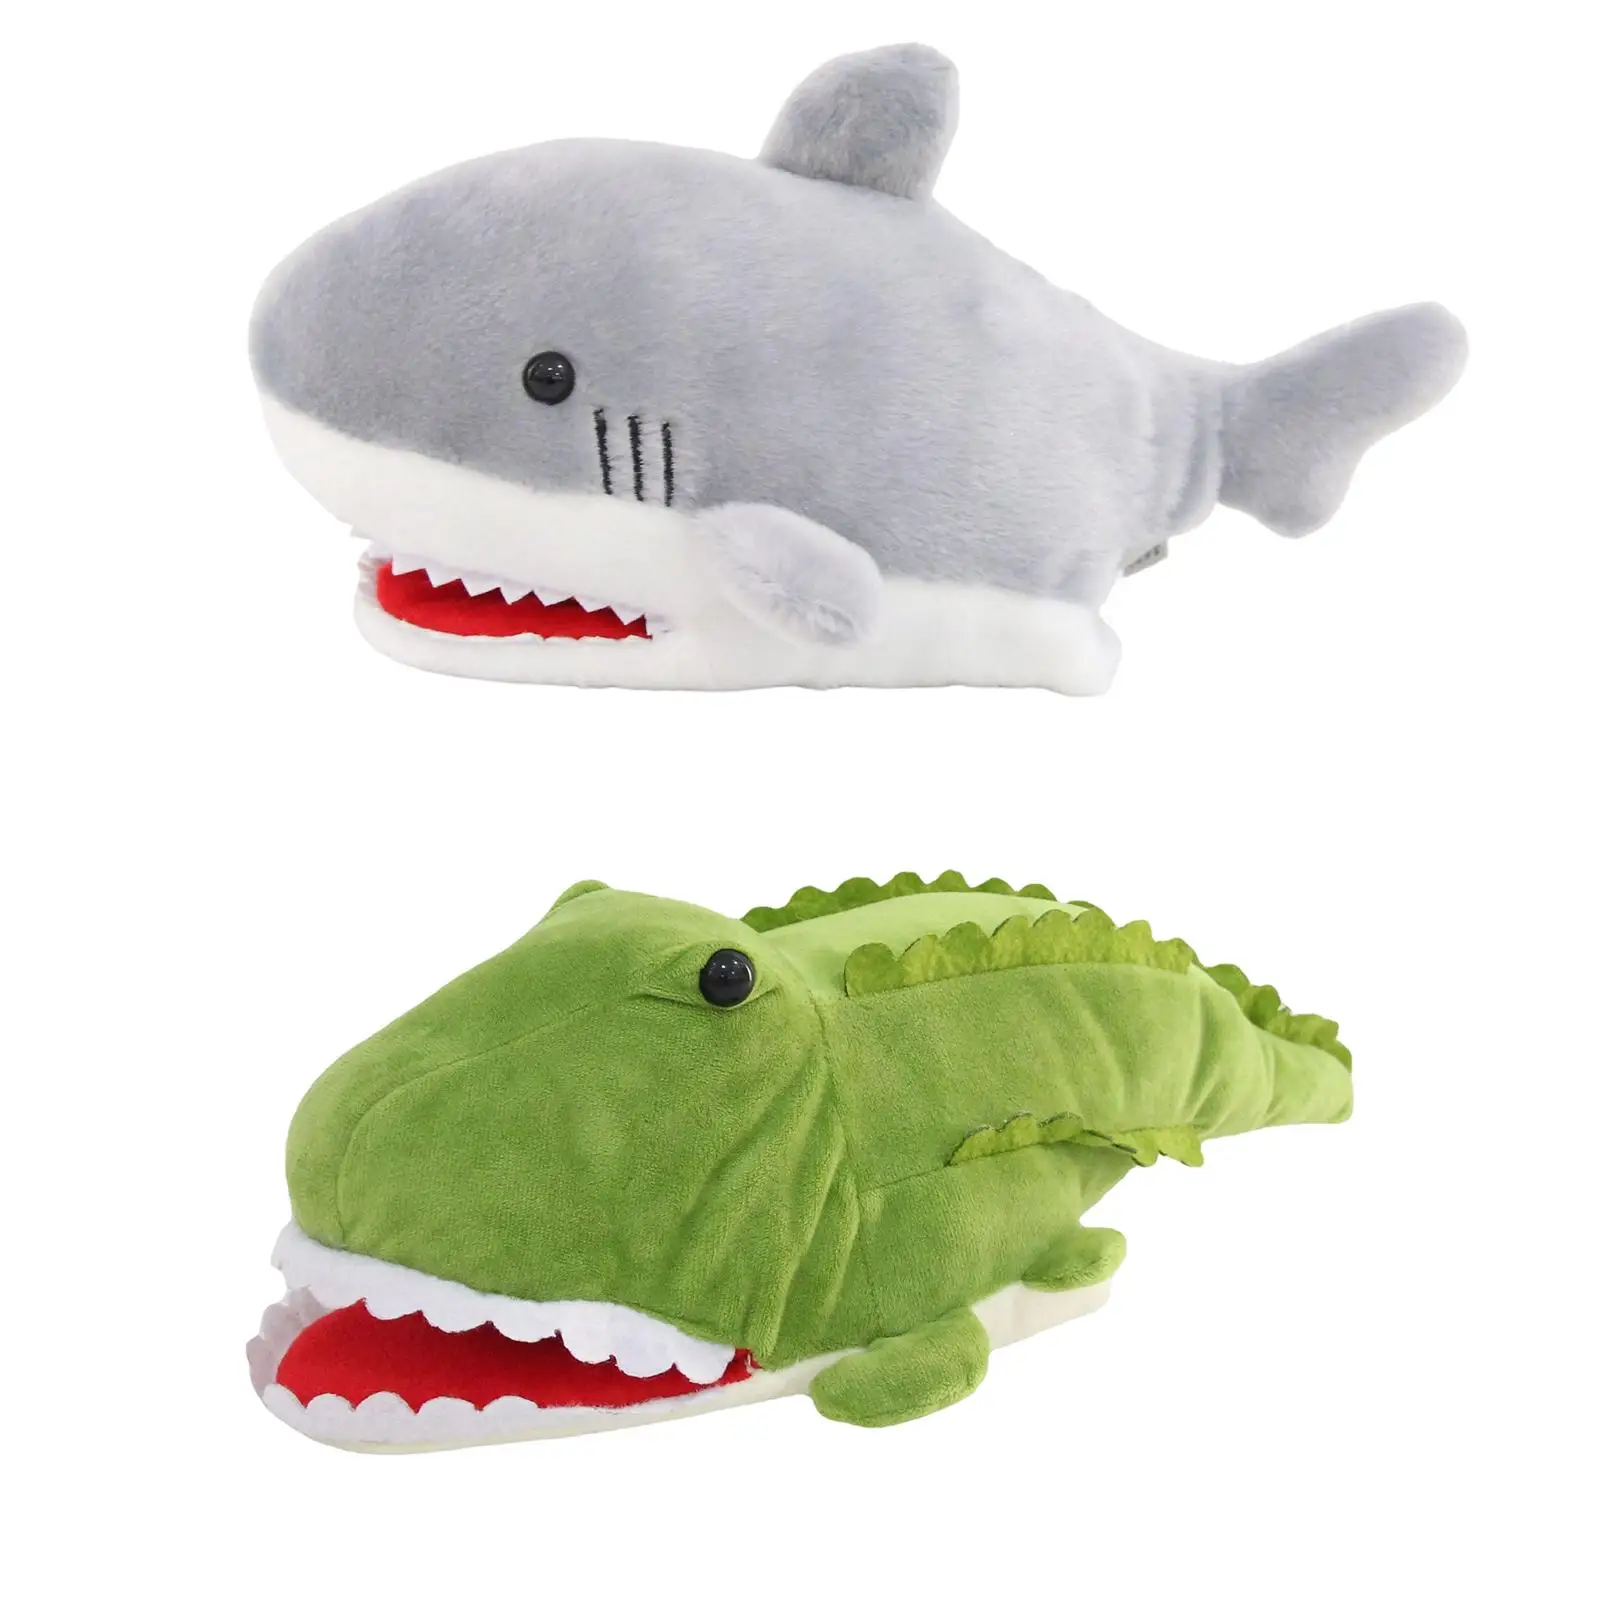 Animal Hand Puppets Kids Gifts Developing Intelligence for Imaginative